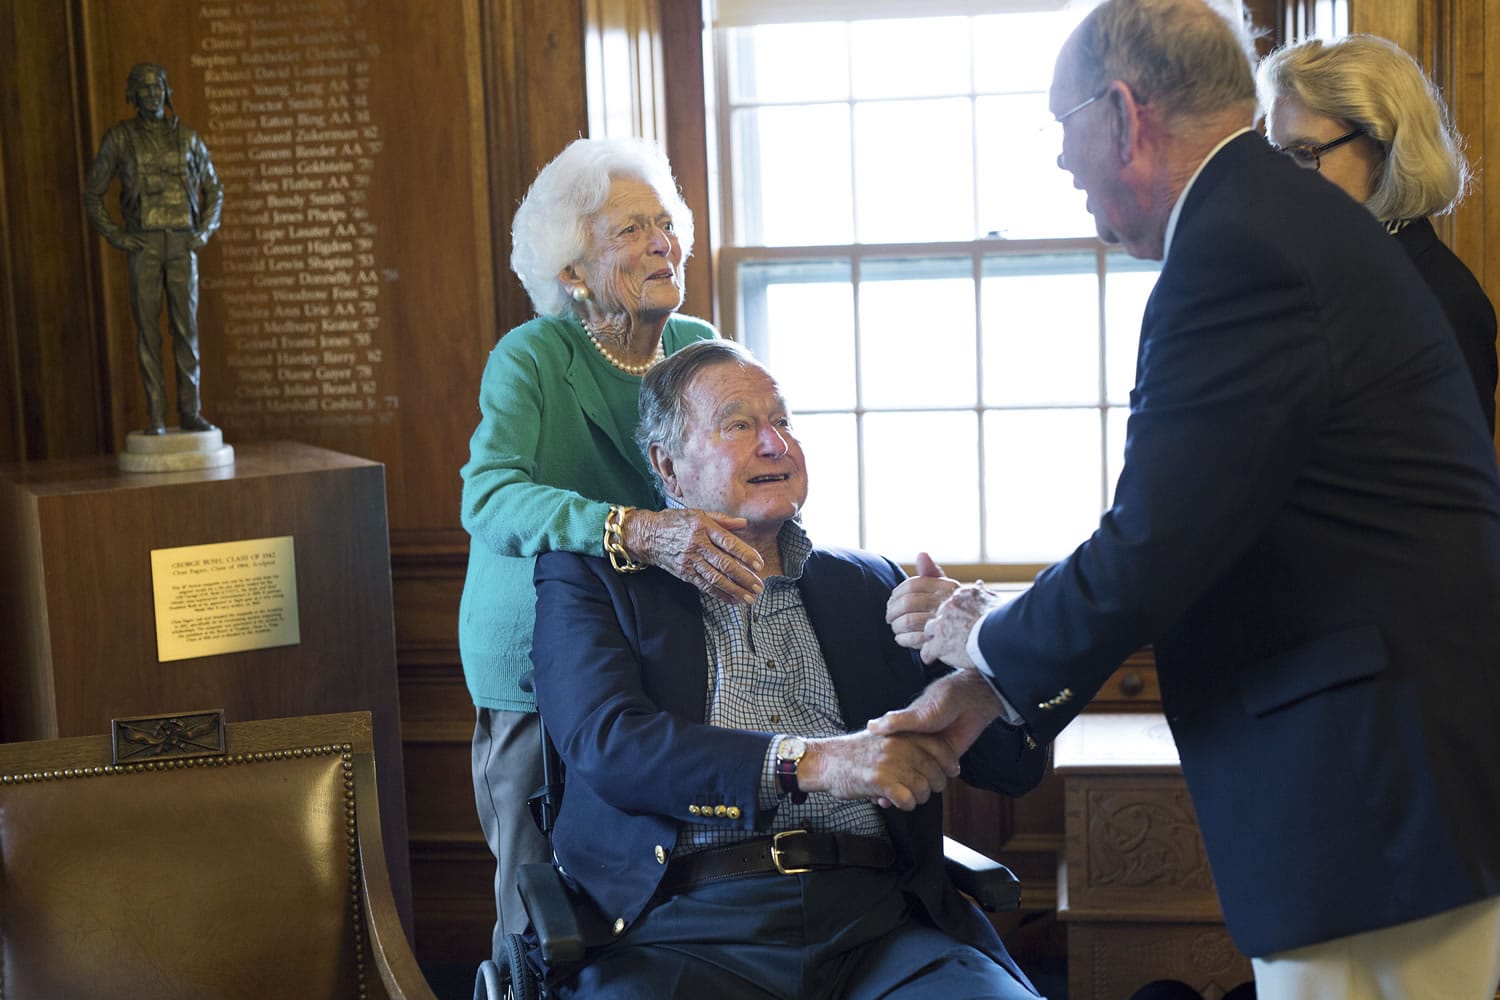 Former President George H.W. Bush, with his wife, Barbara, speaks with former baseball teammate Richard Phelps during a visit to Phillips Academy in Andover, Mass., on Wednesday.